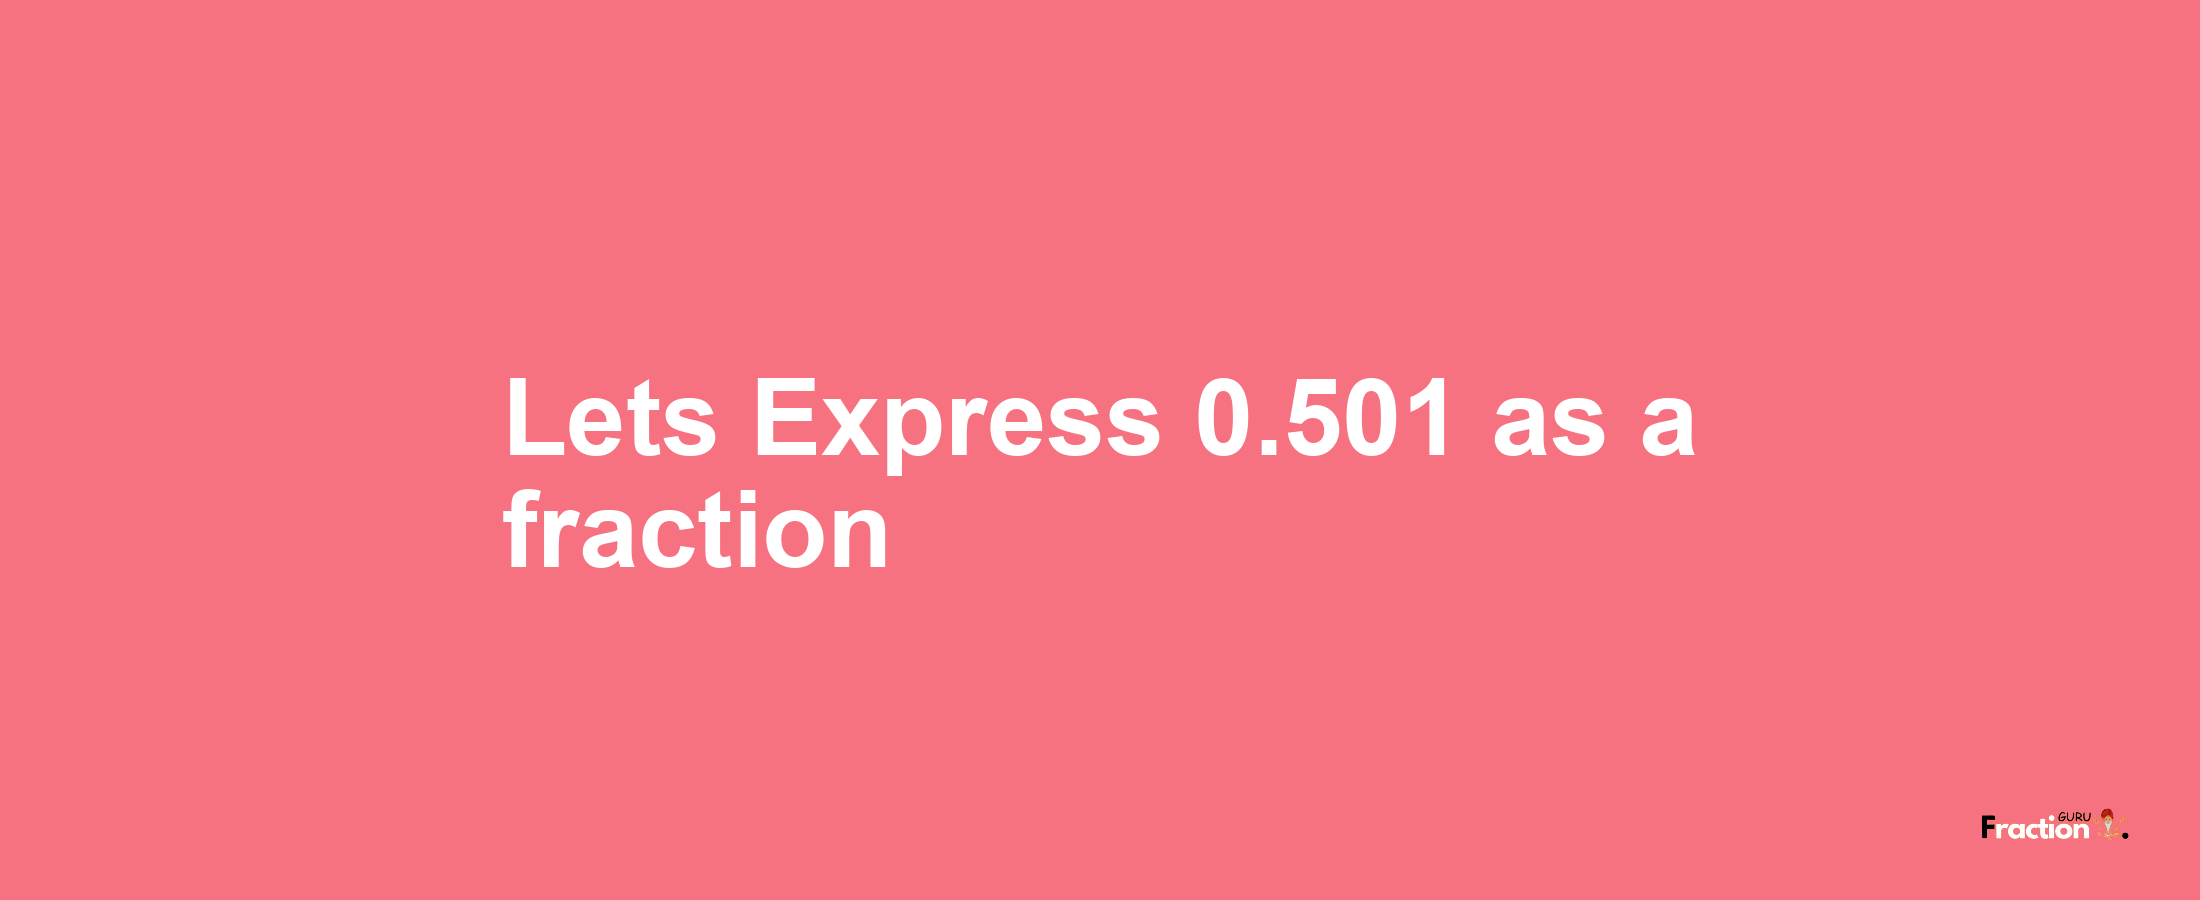 Lets Express 0.501 as afraction